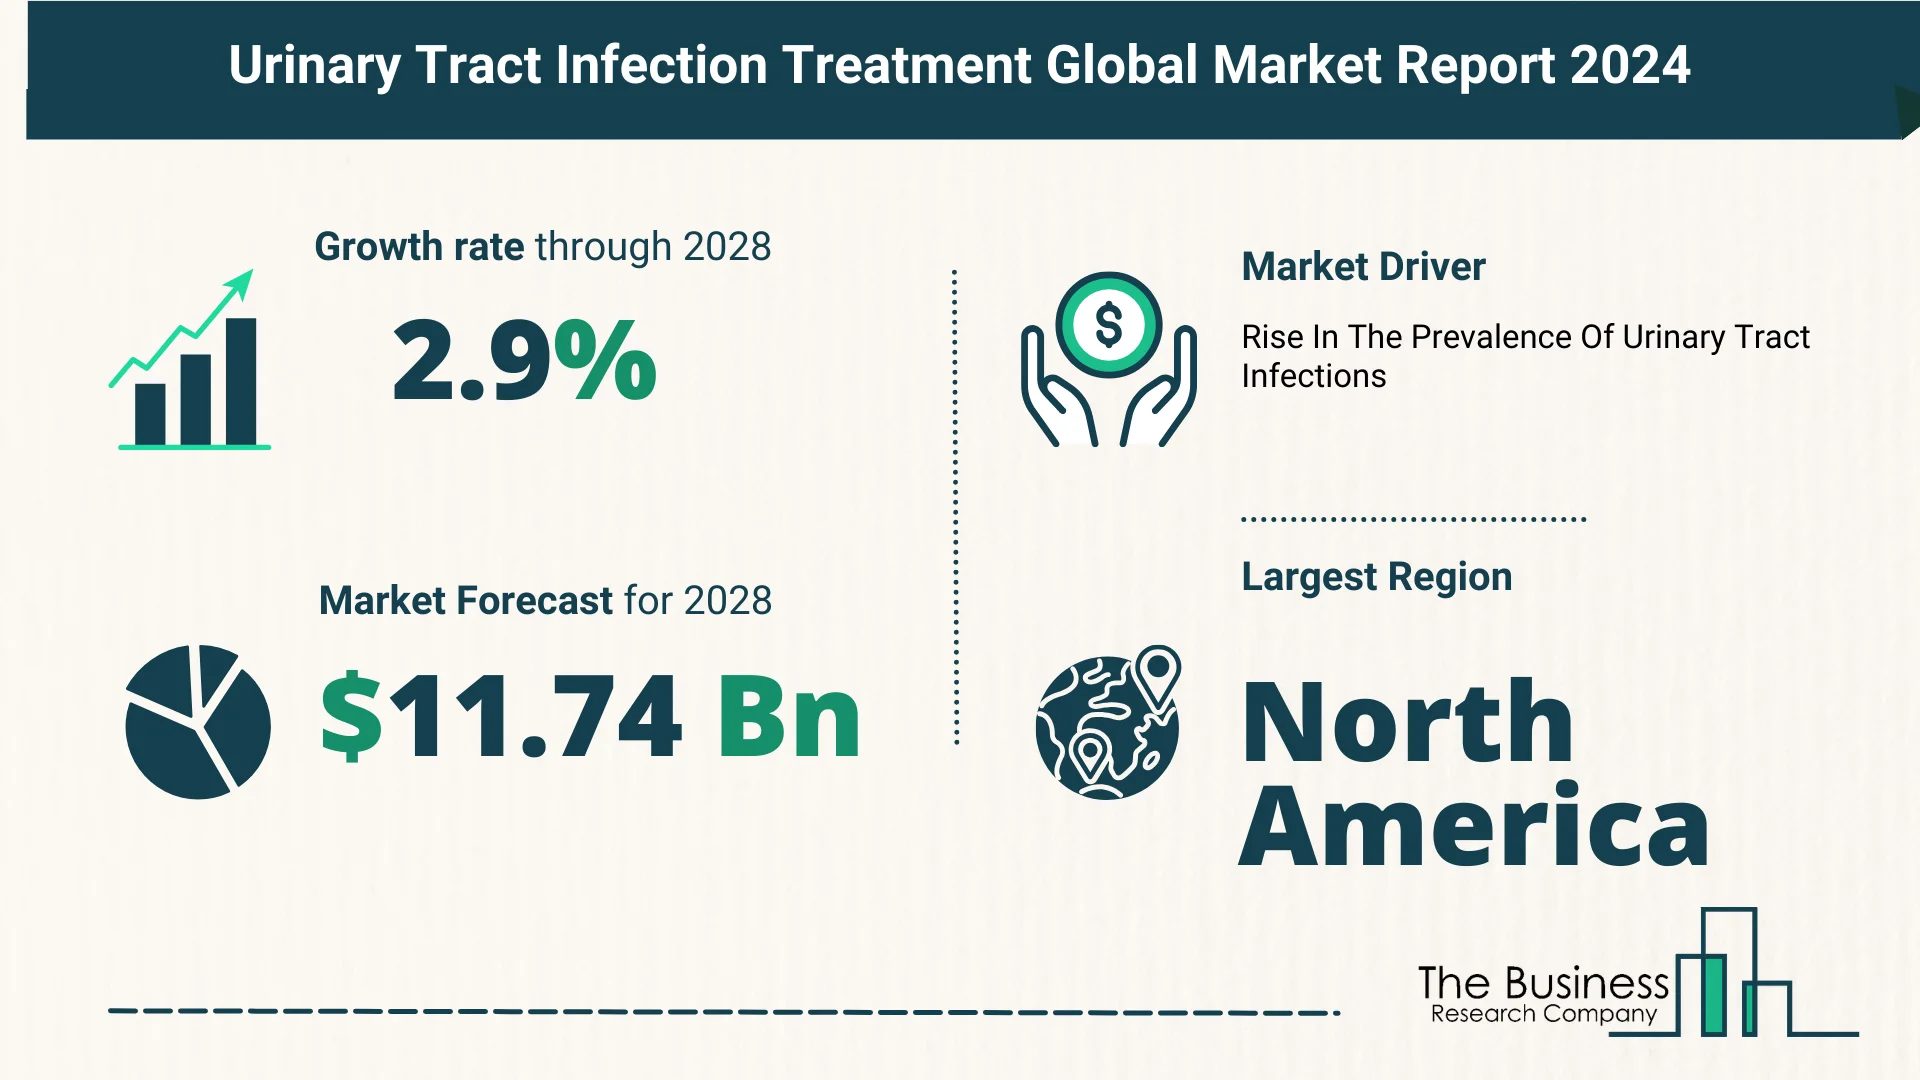 5 Takeaways From The Urinary Tract Infection Treatment Market Overview 2024